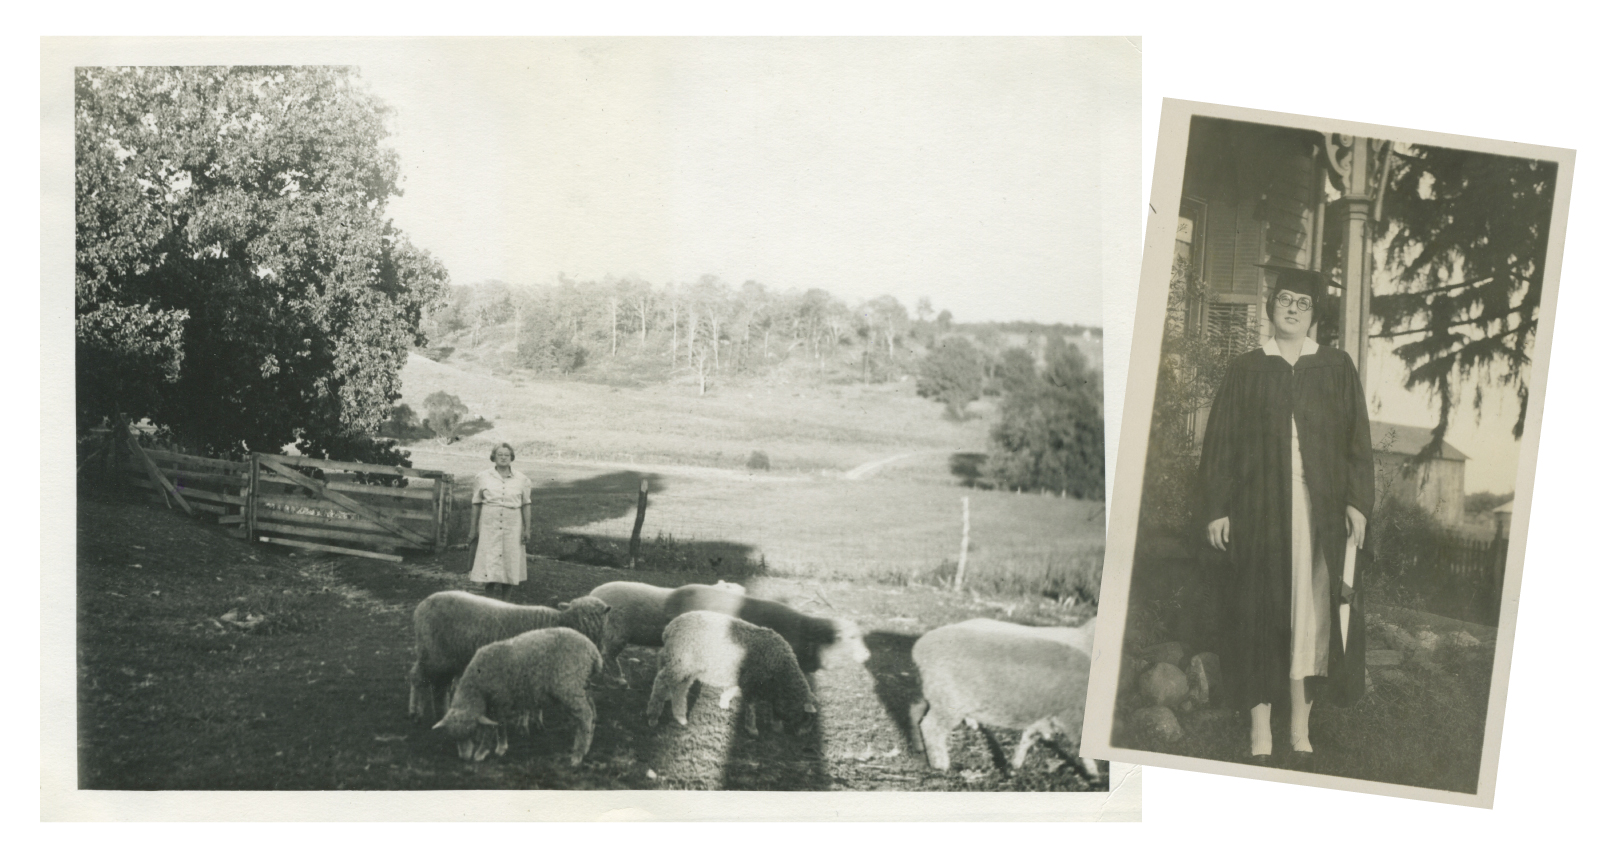 Lessons on the Land: Anna Hobart looks after the sheep on the farm, just a few of the animals that called the place home (left). Dorothy Hobart on her Denison graduation day in 1925 (right).